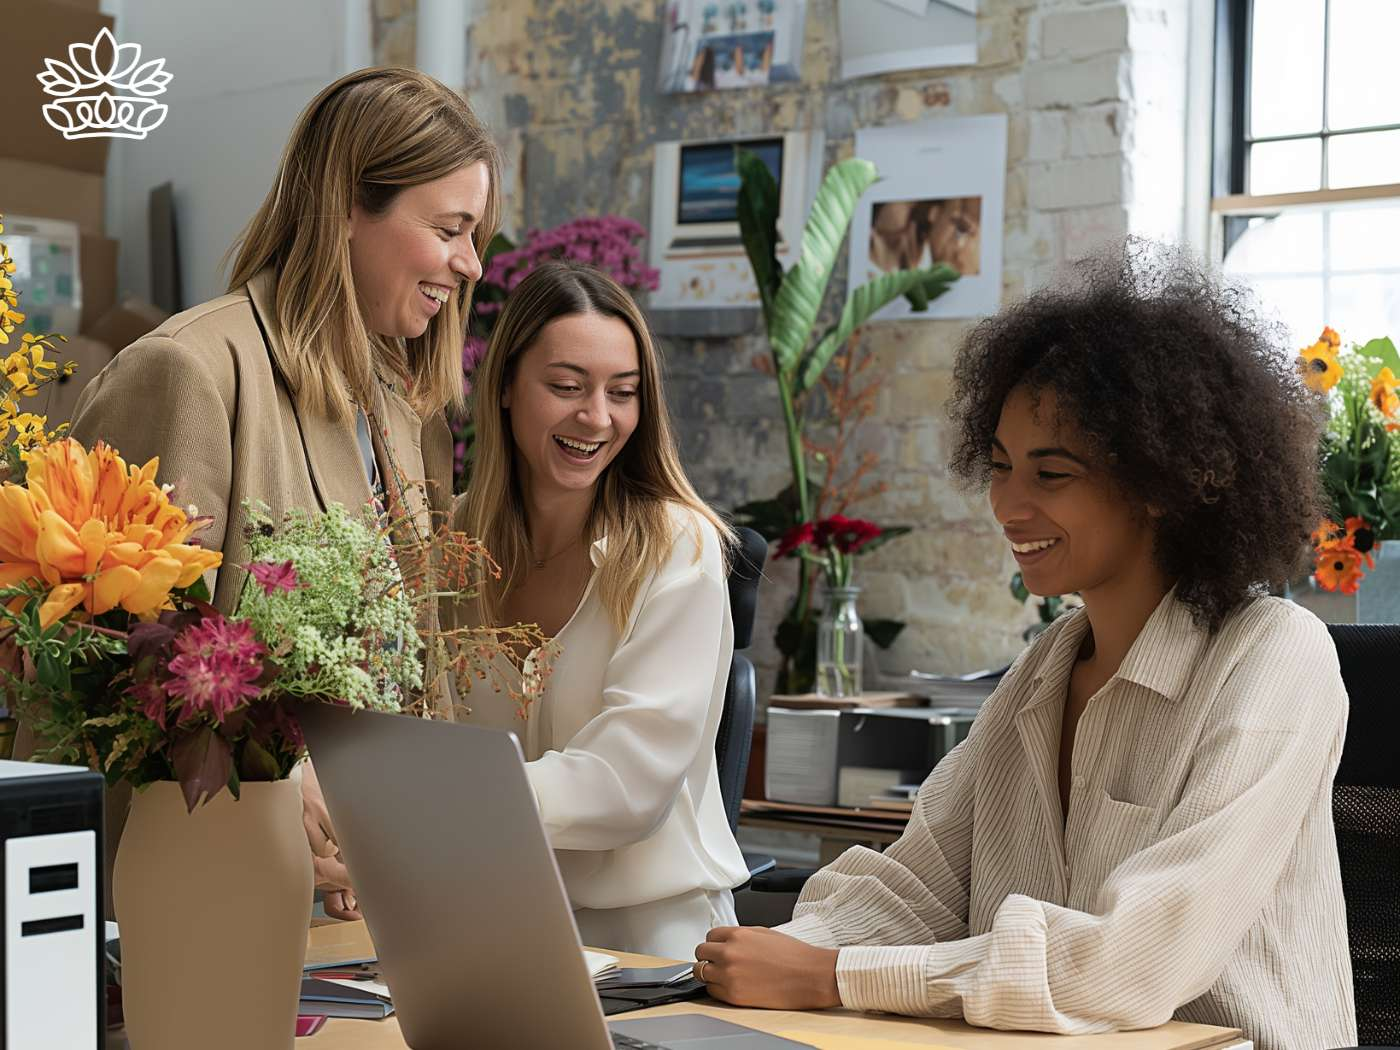 Three colleagues sharing a joyful moment at a desk adorned with vibrant floral arrangements, epitomizing the workplace harmony at Fabulous Flowers and Gifts.